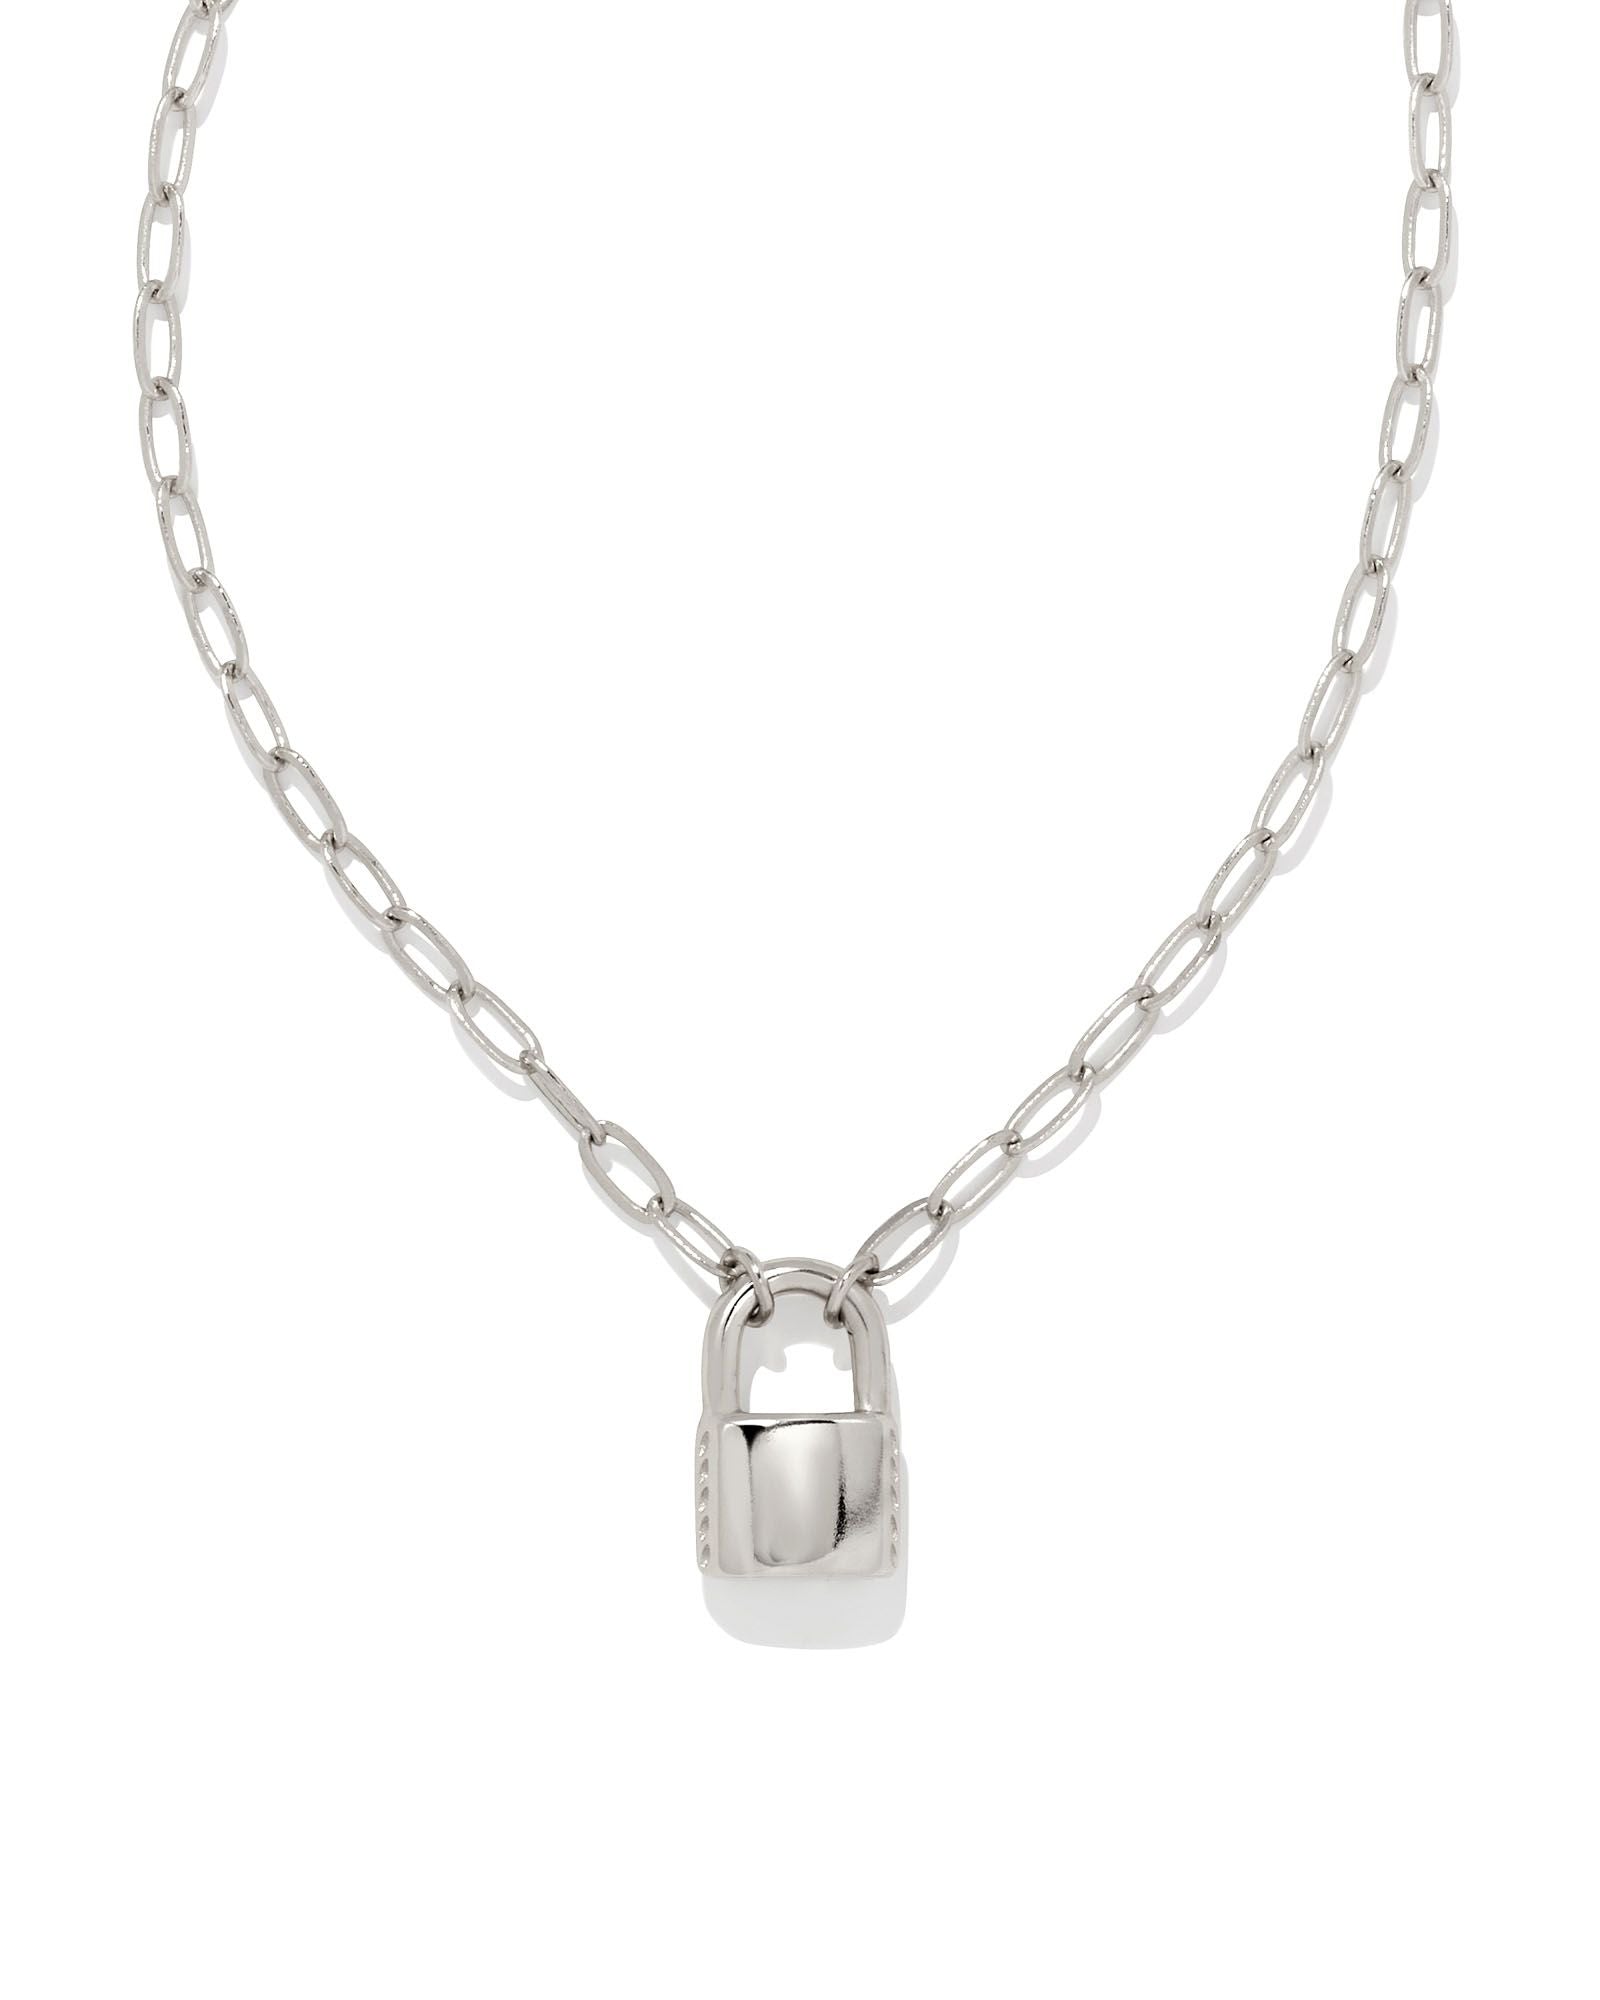 Nanafast Chain Lock Necklace Stainless Steel India | Ubuy